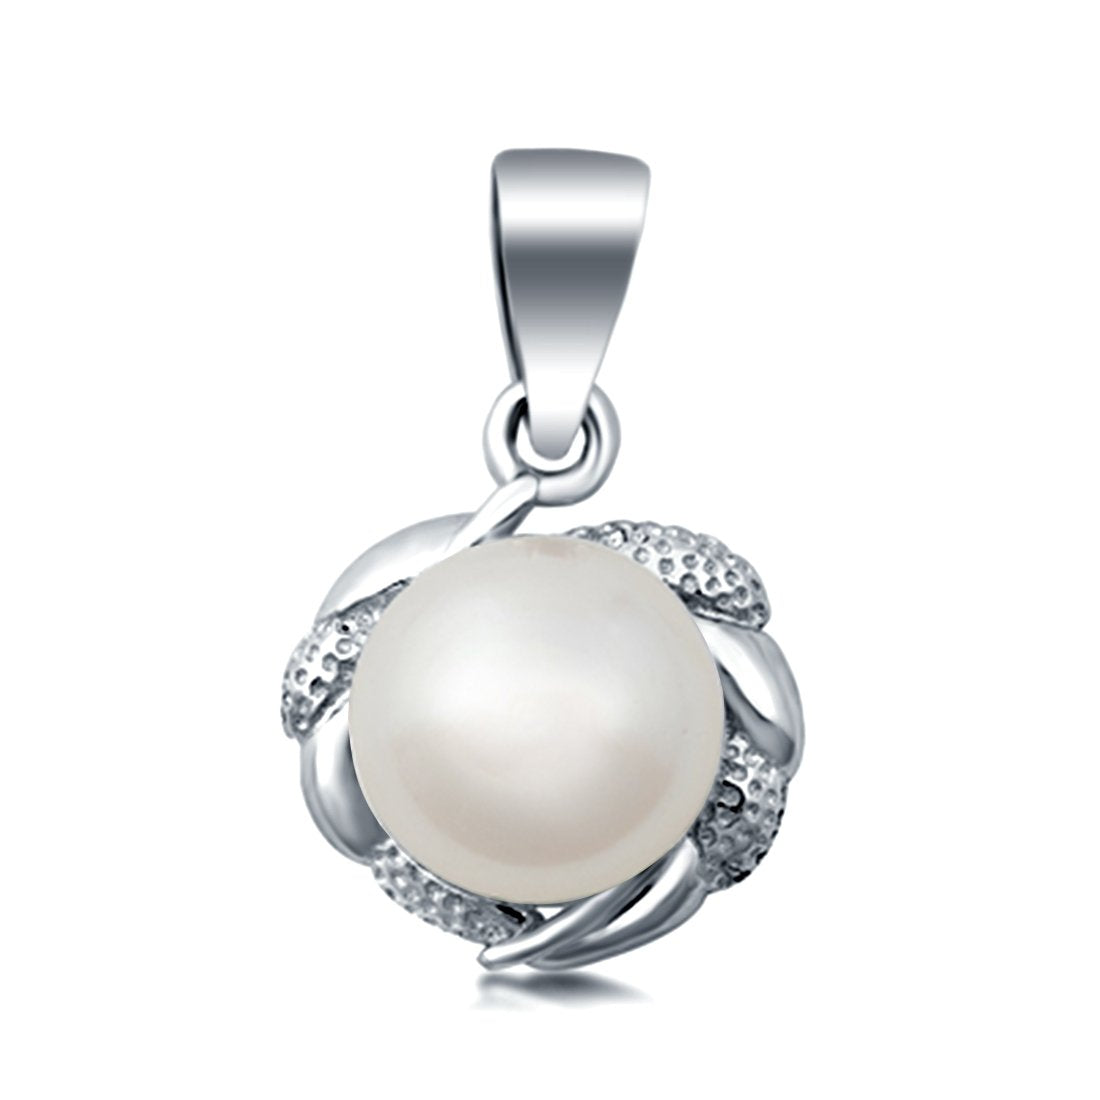 Ornate Jewels' Silver Pearl Necklace